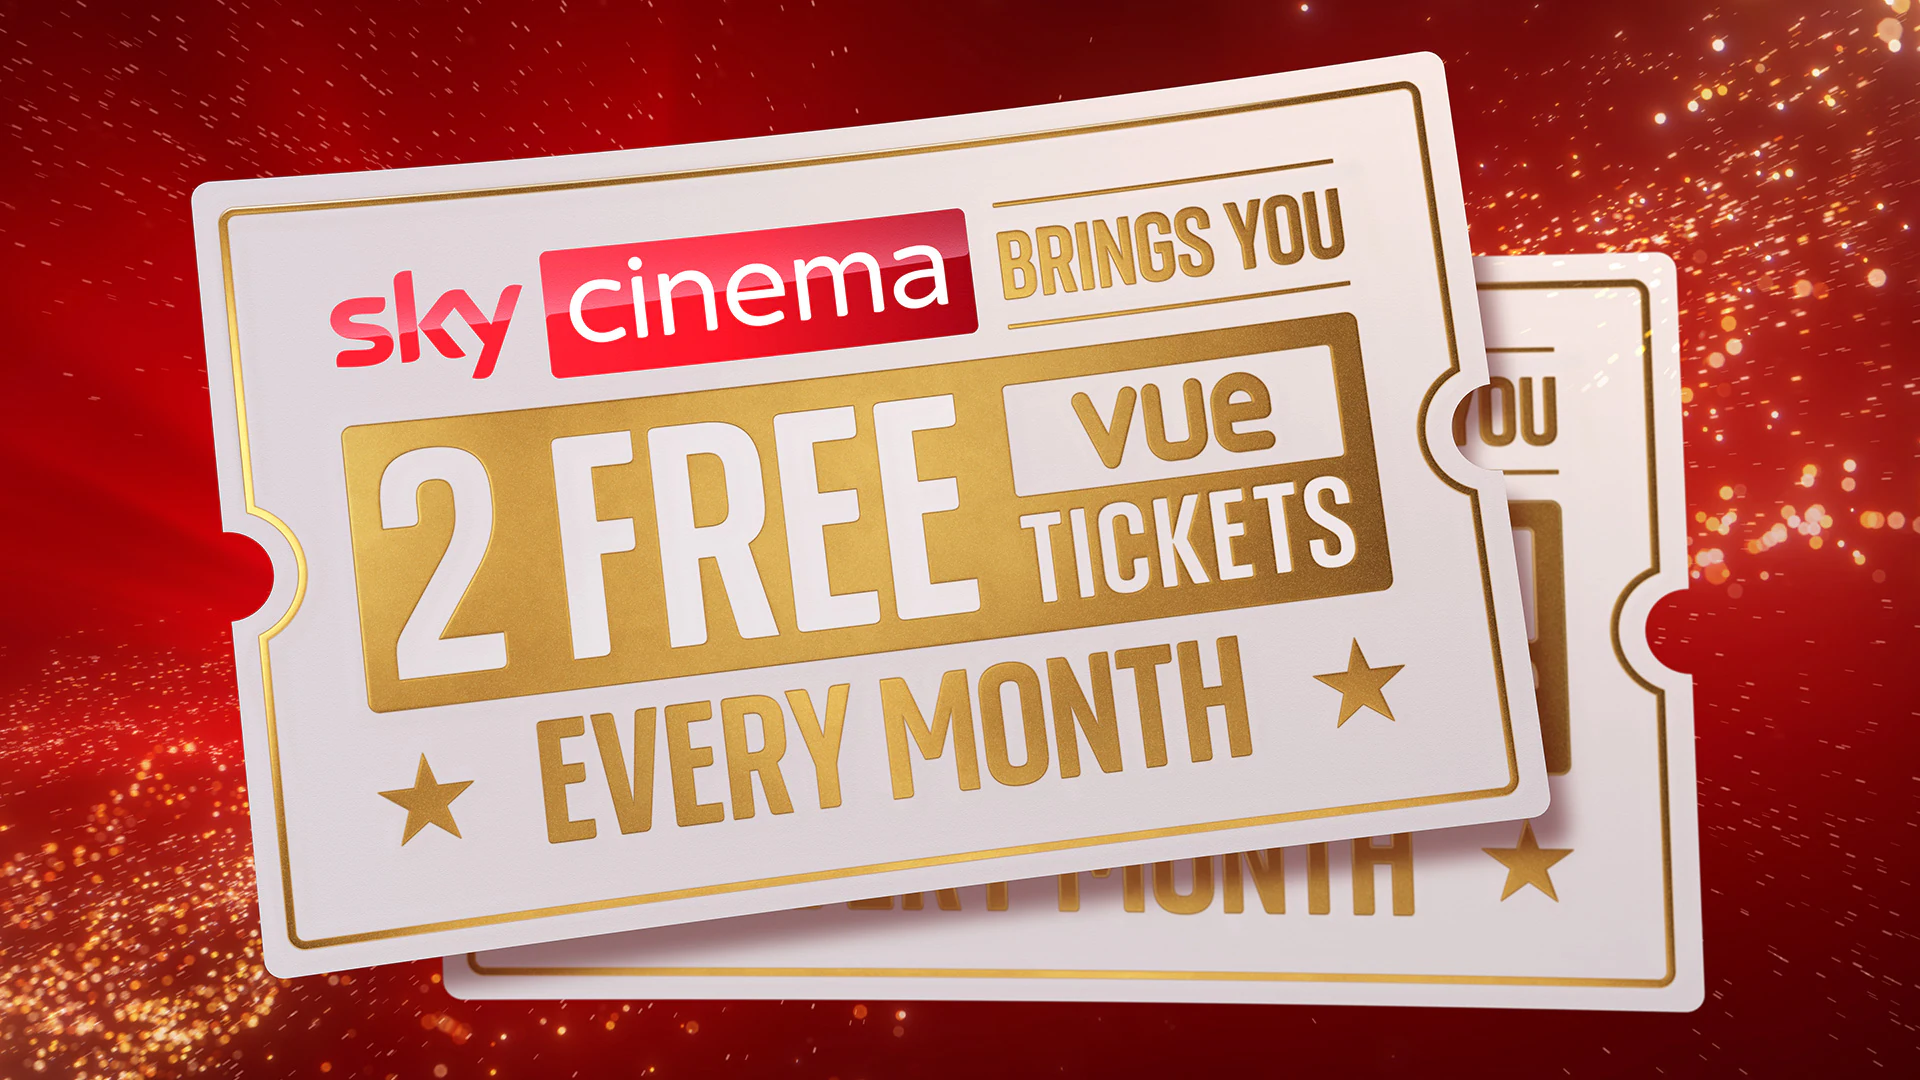 Sky Cinema offers customers two FREE Vue cinema tickets every month